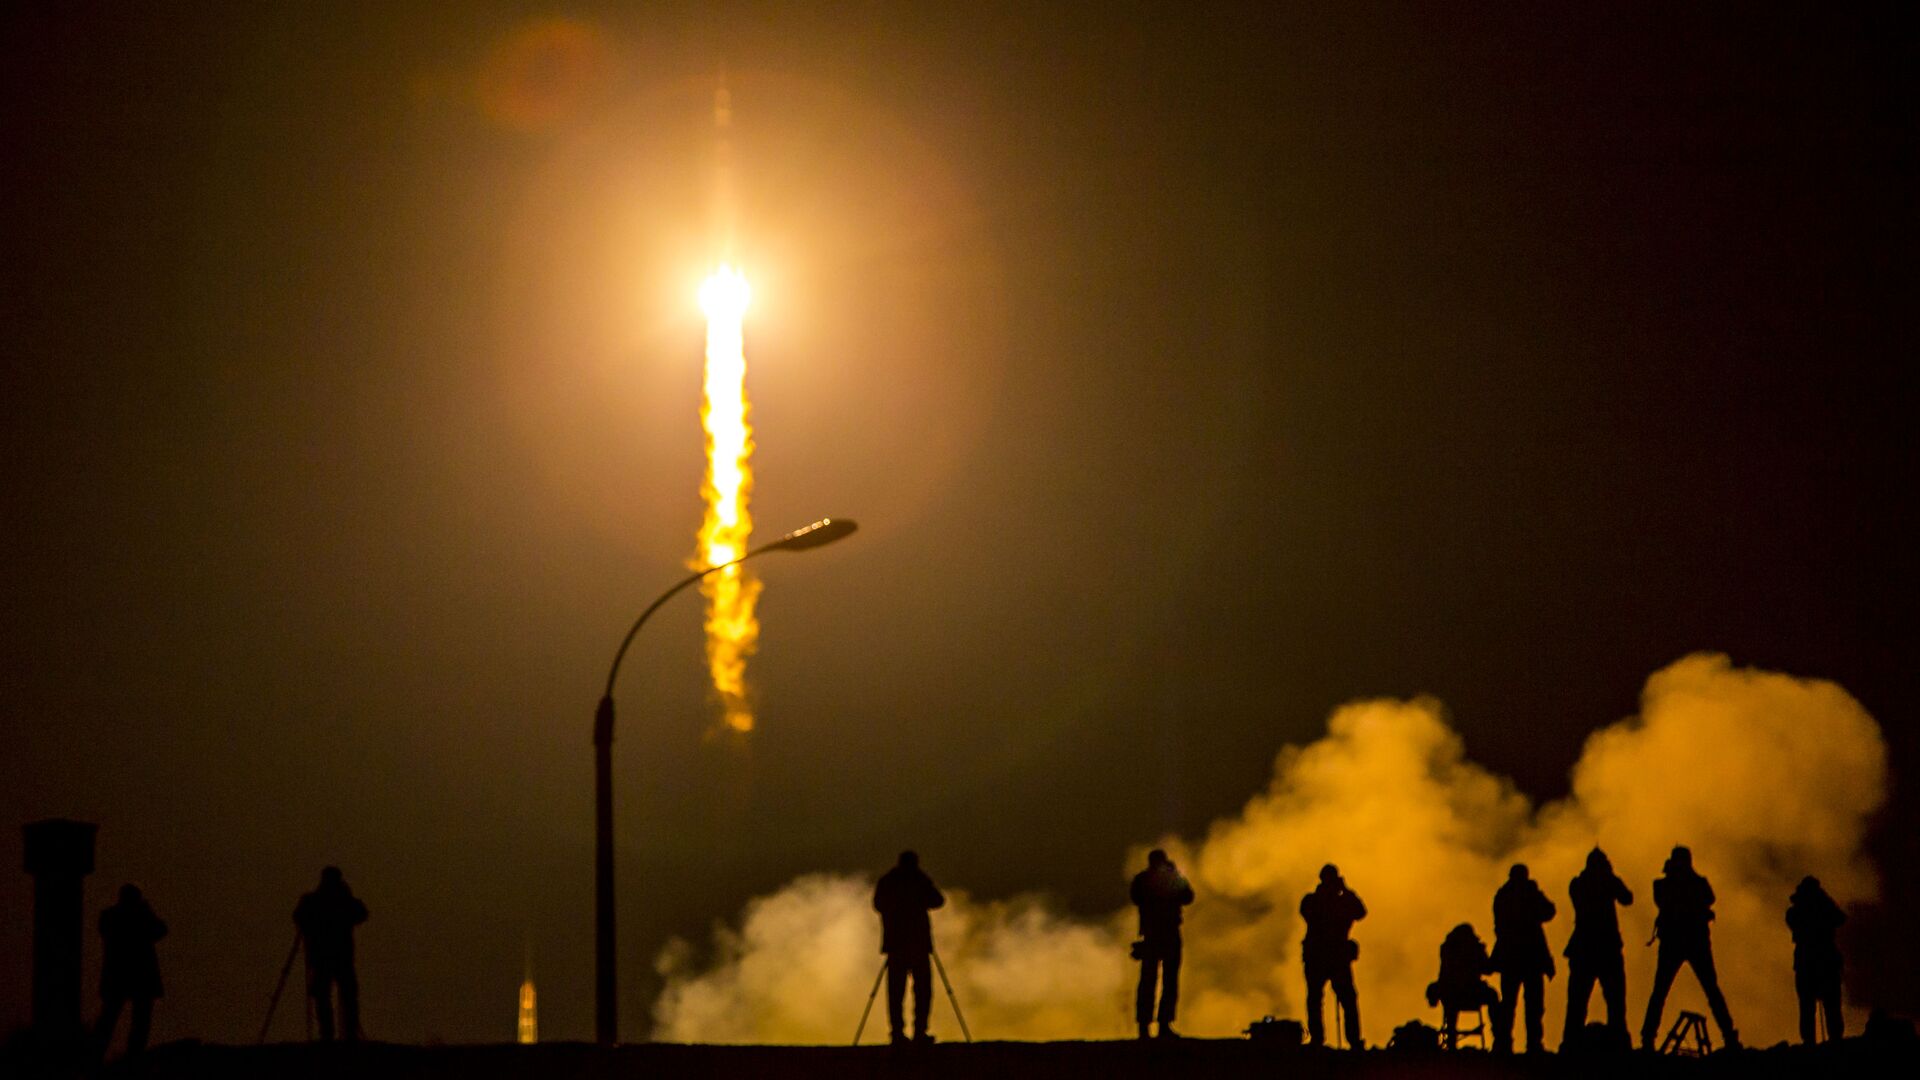 Media photograph the Soyuz TMA-16M spacecraft is seen as it launches to the International Space Station with Expedition 43 NASA Astronaut Scott Kelly, Russian Cosmonauts Mikhail Kornienko, and Gennady Padalka of the Russian Federal Space Agency (Roscosmos) onboard Saturday, March 28, 2015, Kazakh time (March 27 Eastern time) from the Baikonur Cosmodrome in Kazakhstan. As the one-year crew, Kelly and Kornienko will return to Earth on Soyuz TMA-18M in March 2016 - اسپوتنیک افغانستان  , 1920, 24.01.2022